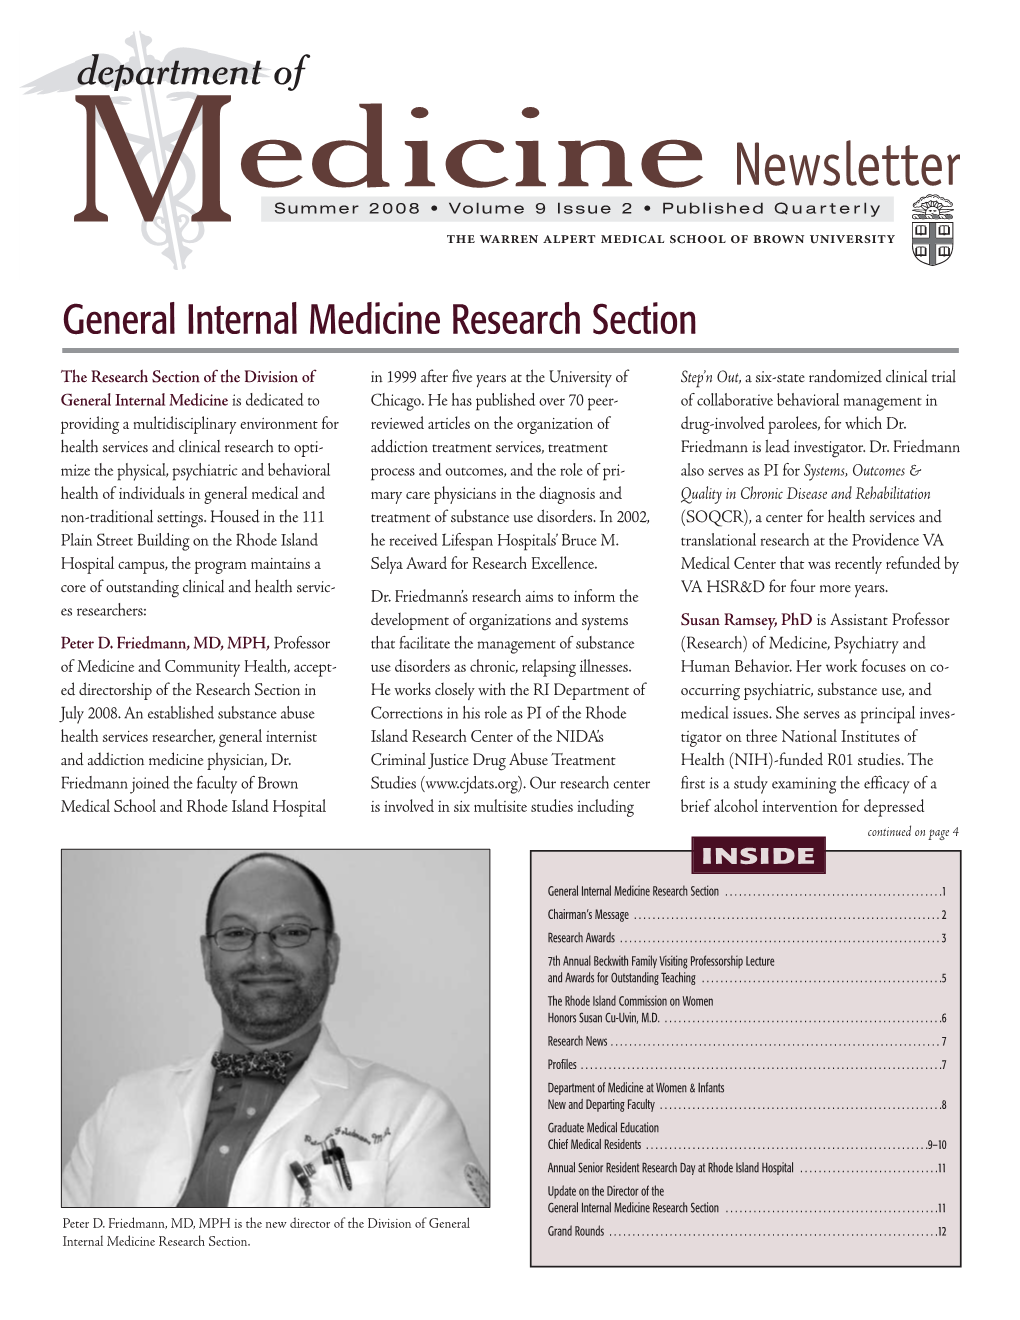 General Internal Medicine Research Section